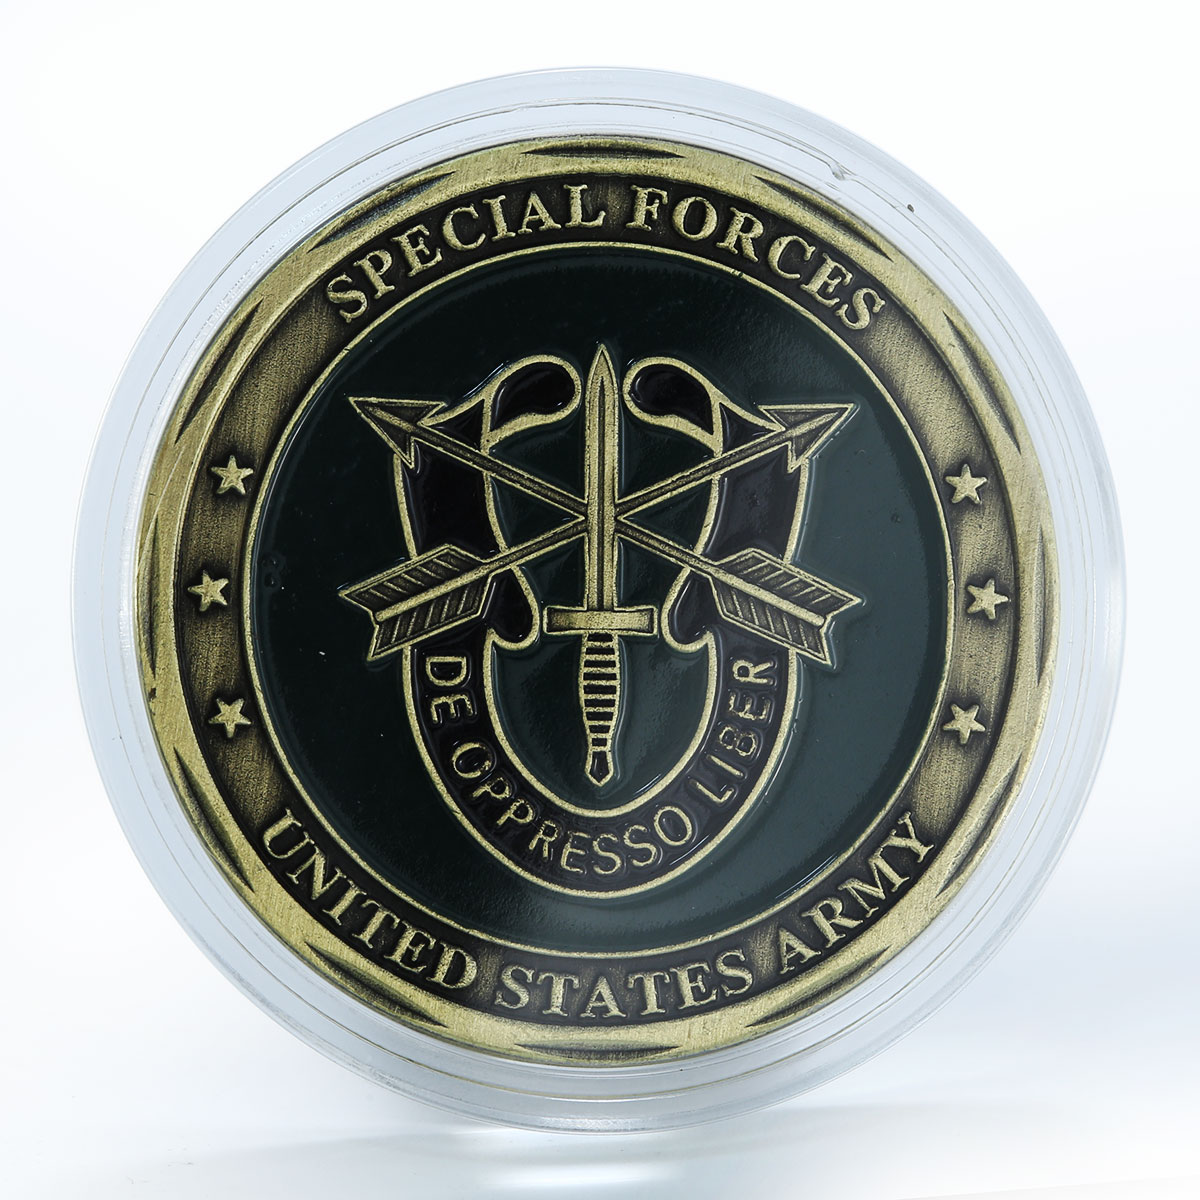 USA Army, Special Forces Green Beret, De oppresso liber, Military, Warrior token